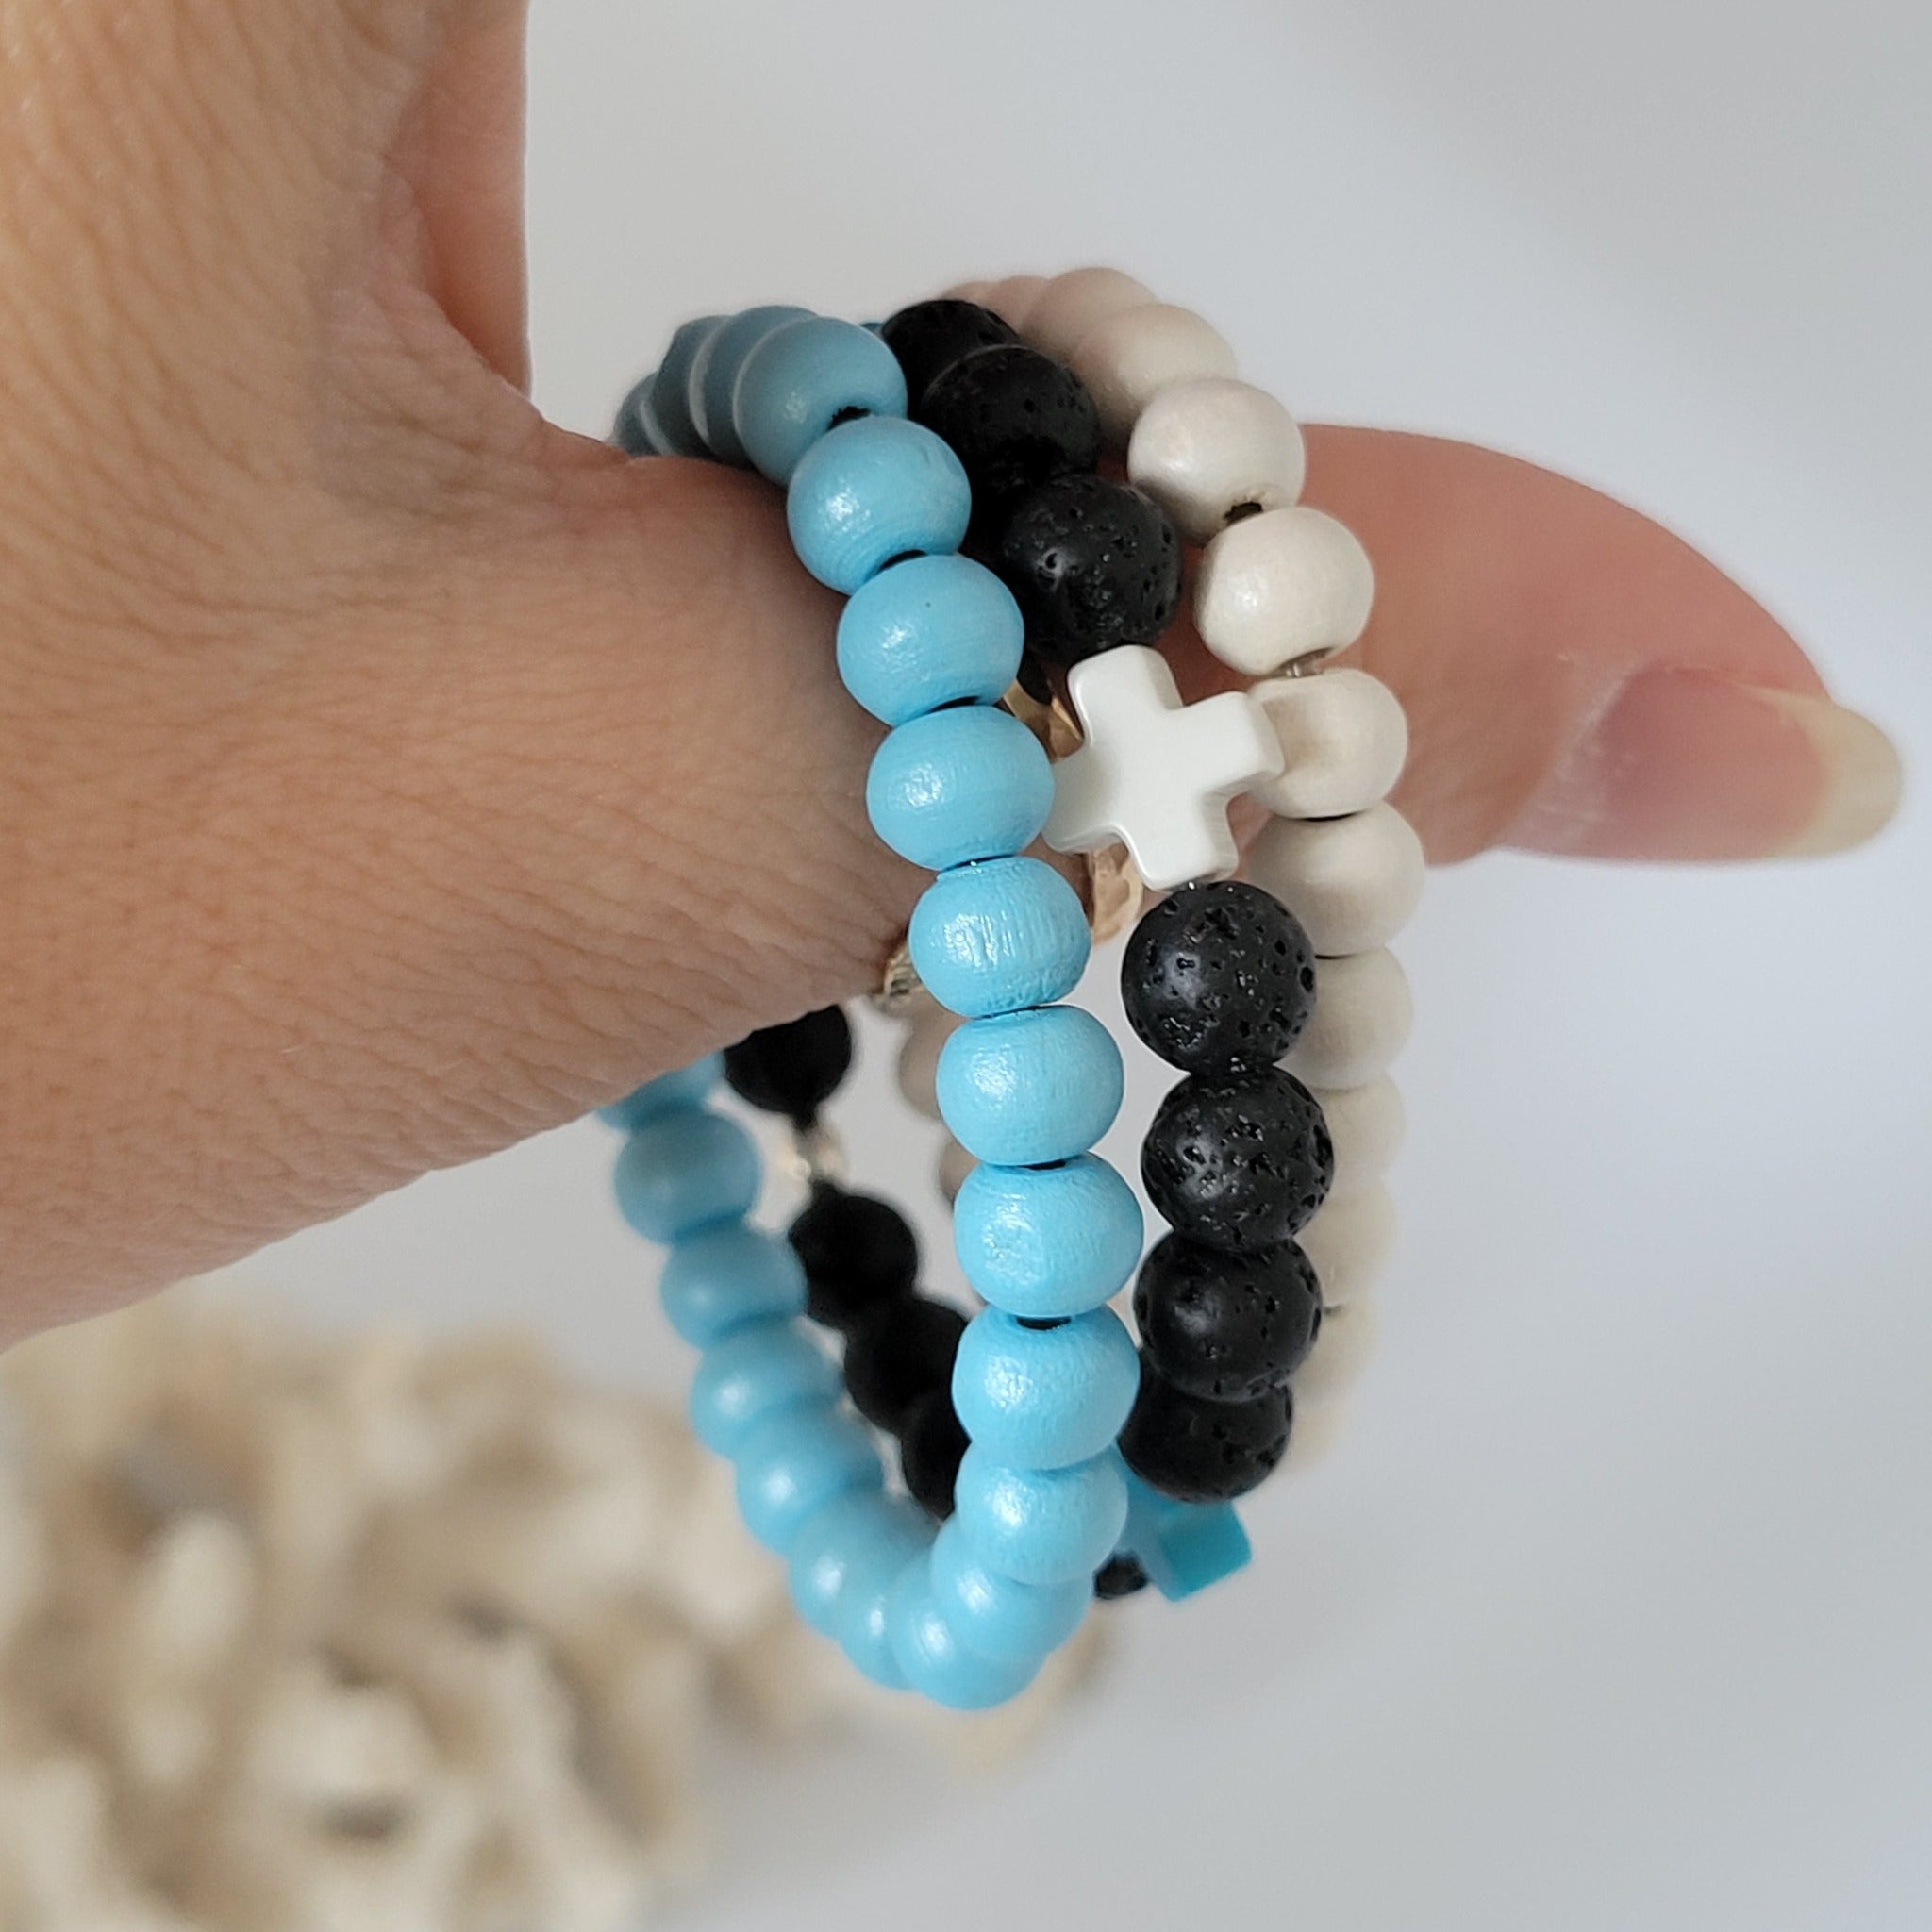 Children's or Infants Painted Wooden Bead Bracelets - Boys and Girls